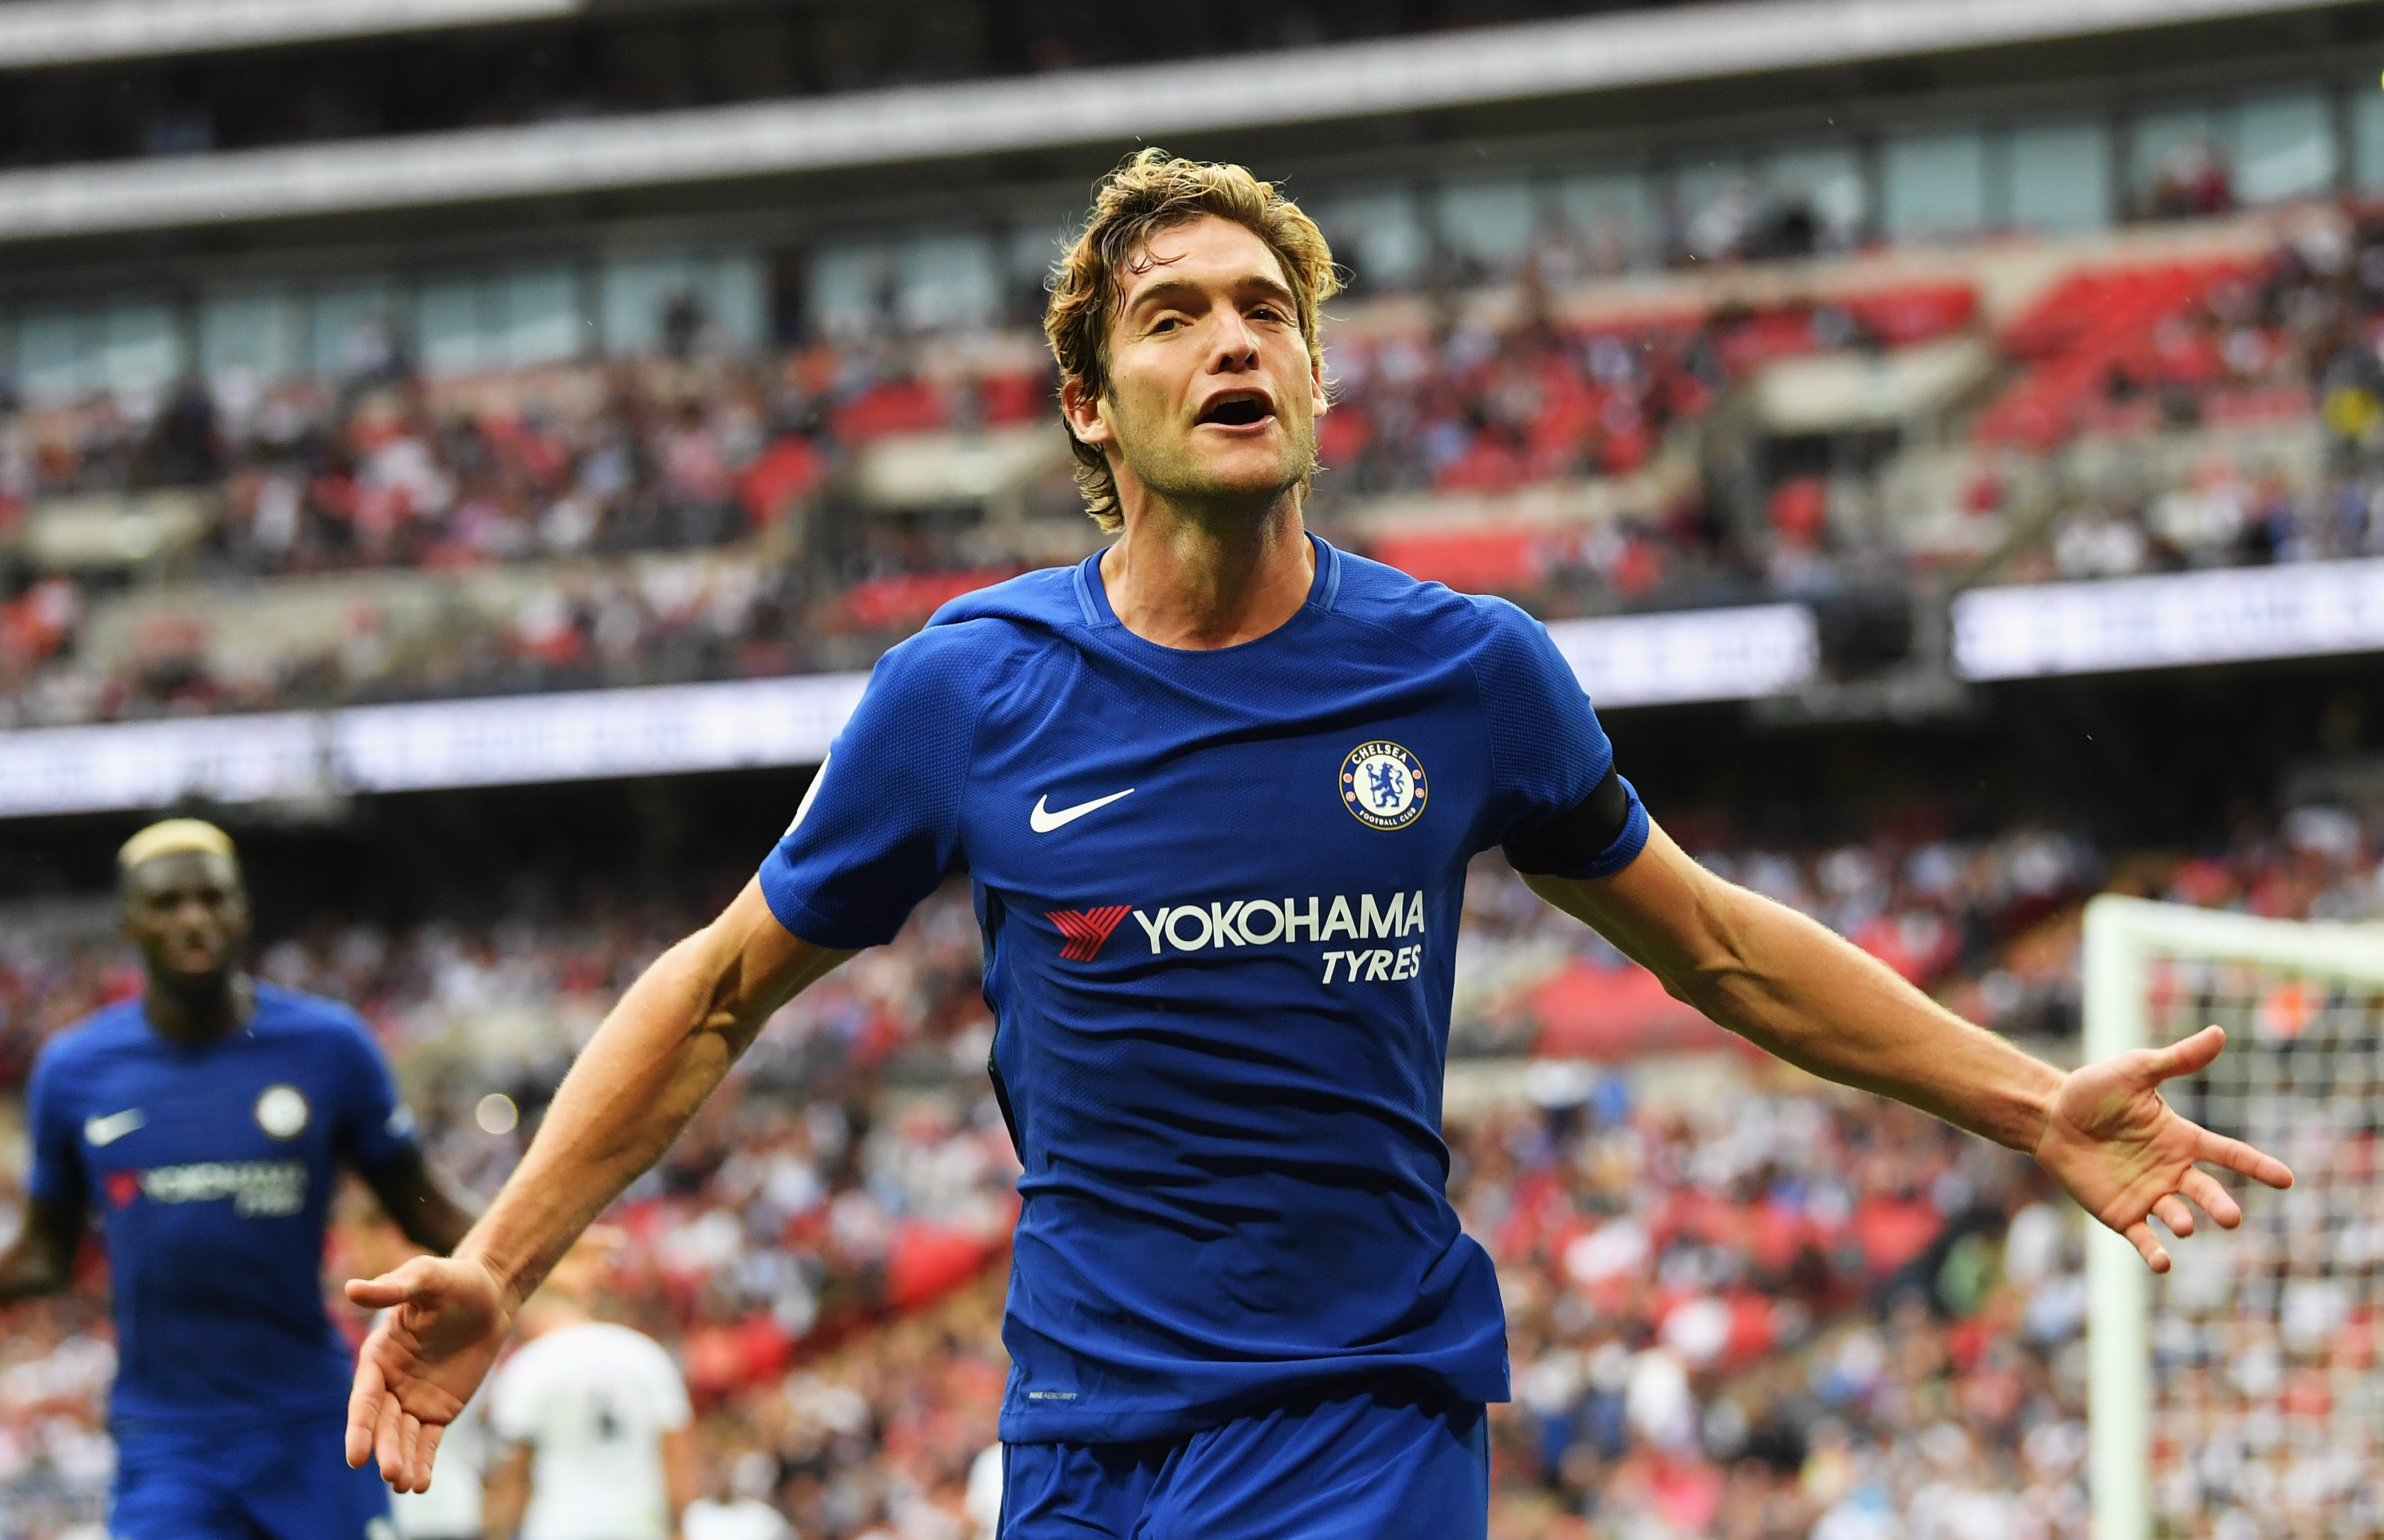 LONDON, ENGLAND - AUGUST 20:  Marcos Alonso of Chelsea celebrates scoring his sides second goal during the Premier League match between Tottenham Hotspur and Chelsea at Wembley Stadium on August 20, 2017 in London, England.  (Photo by Justin Setterfield/Getty Images)